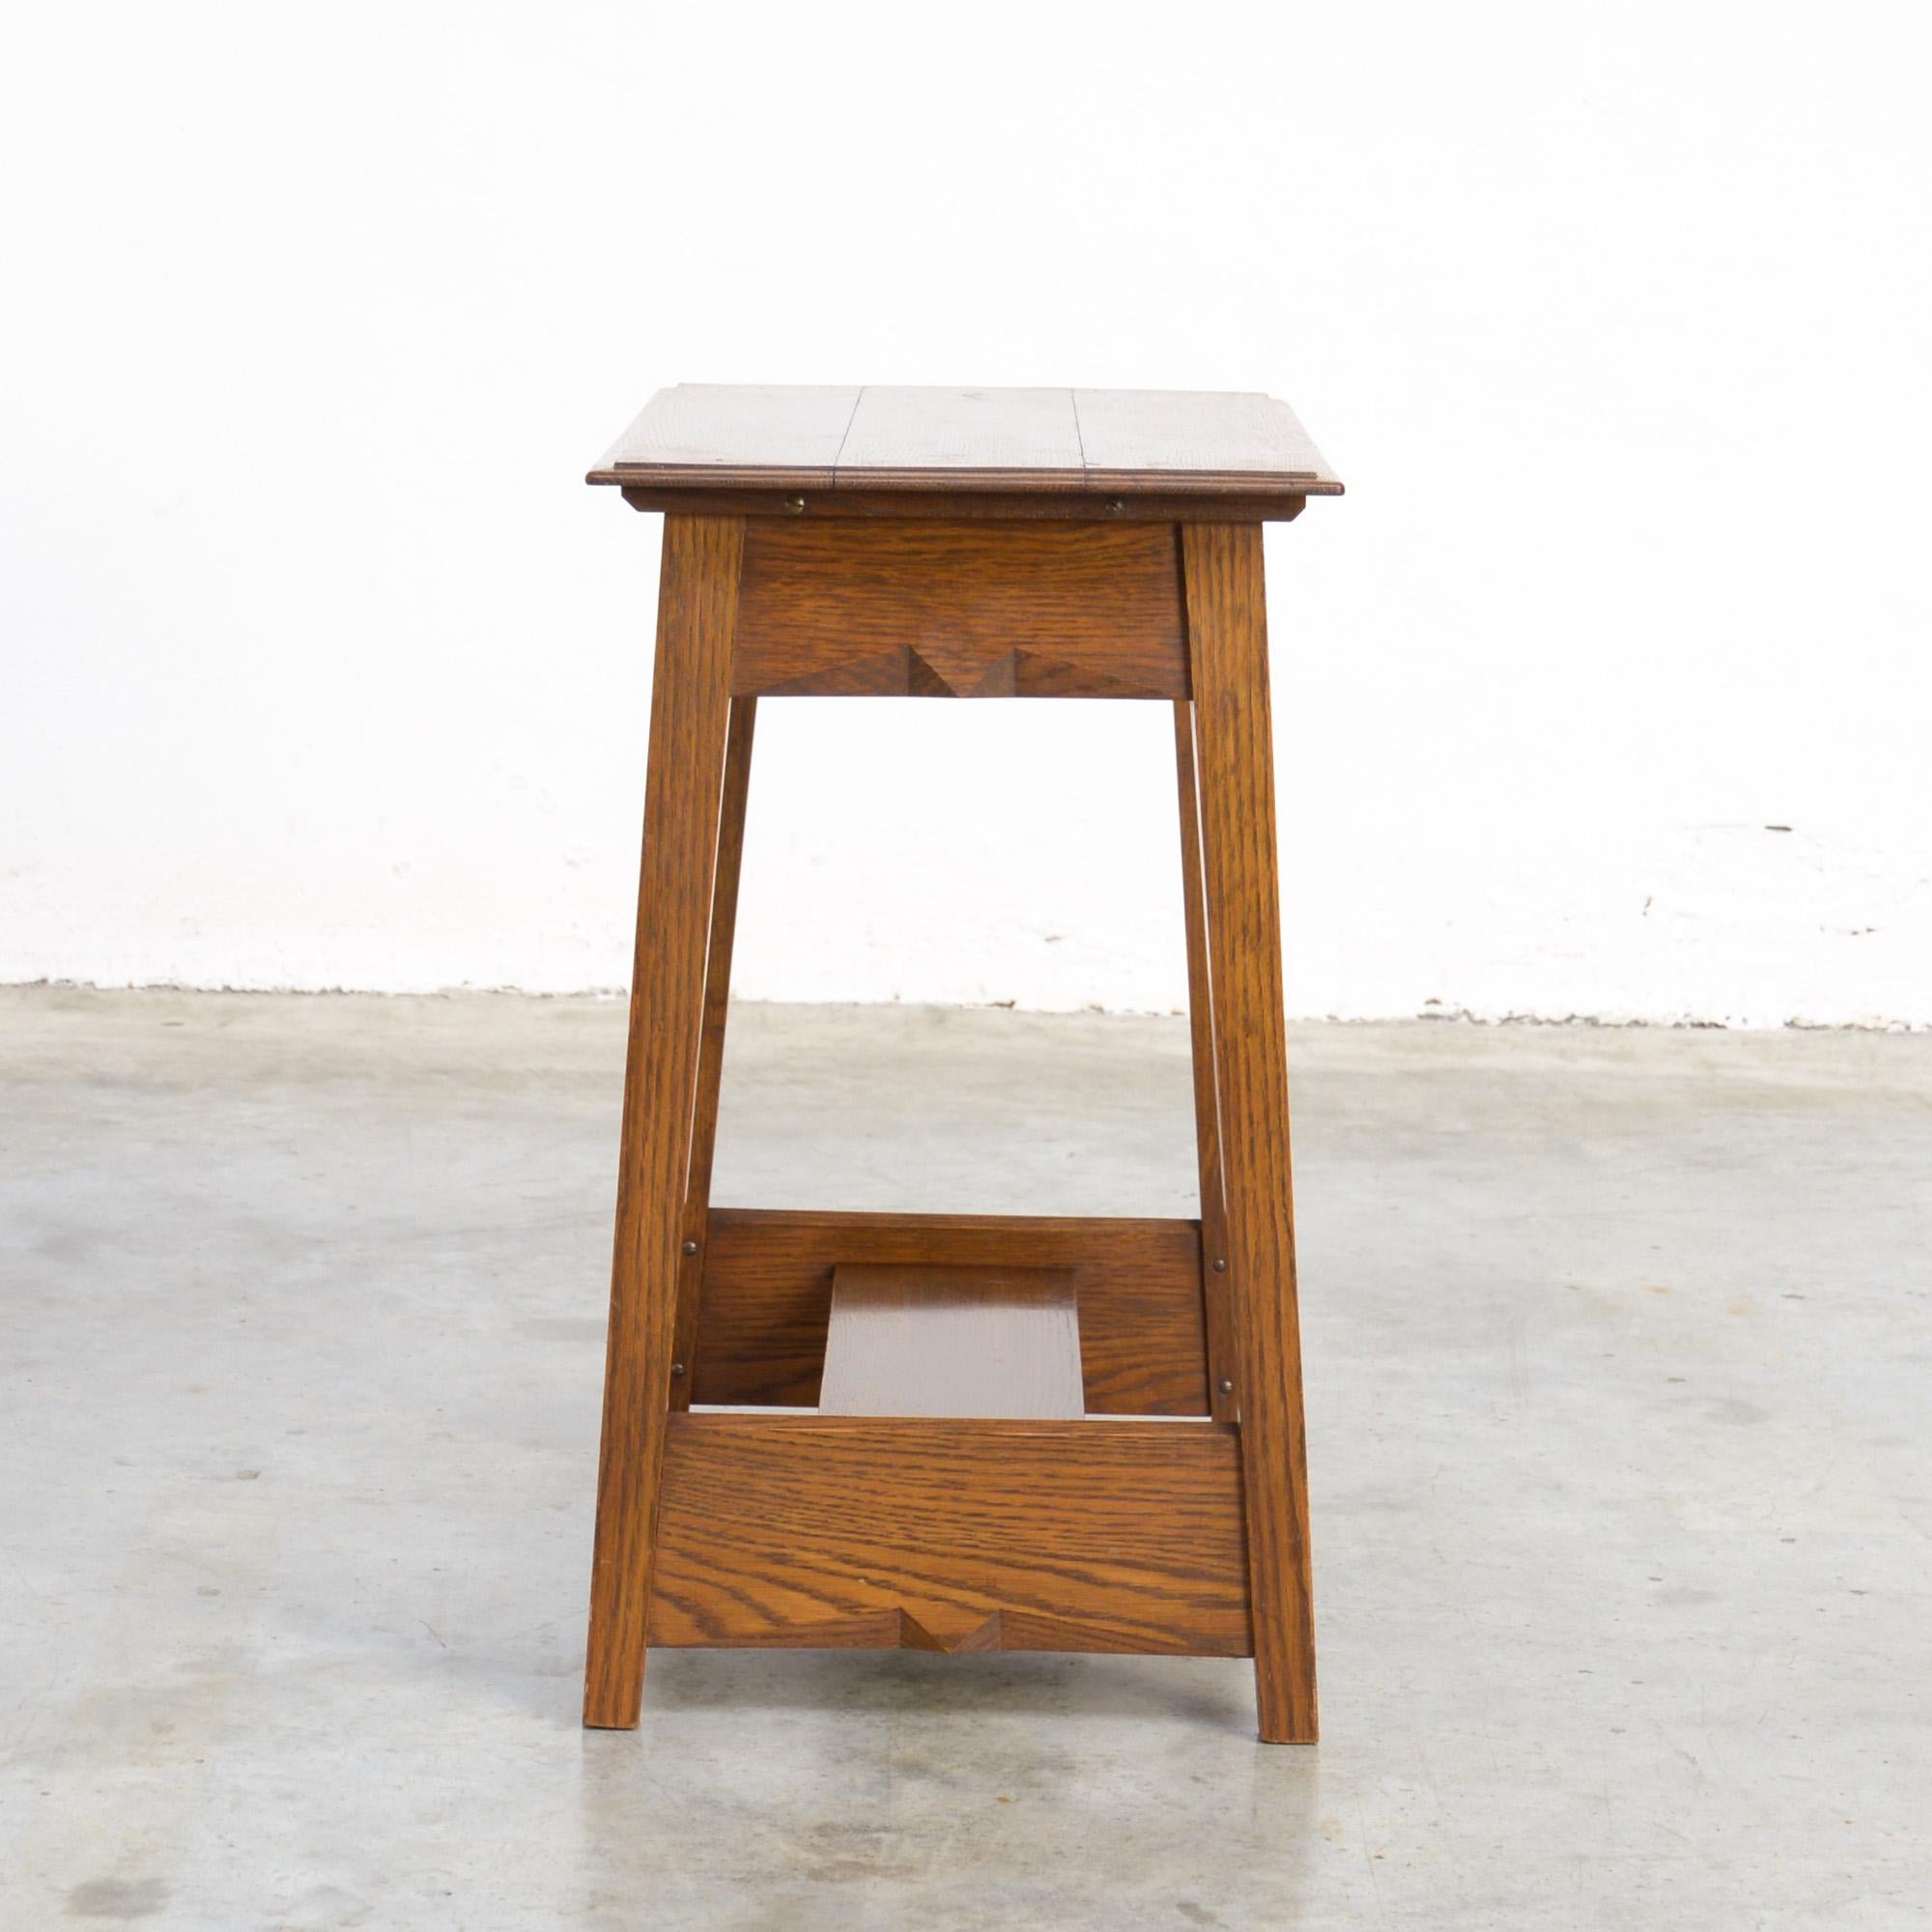 This wooden side table is signed G.A.V.D. Groenekan.
It is a pure table with some sophisticated details.
This strong handmade table was made by Gerard A. Van de Groenekan, who also worked for Gerrit Rietveld. This design is in the style of the